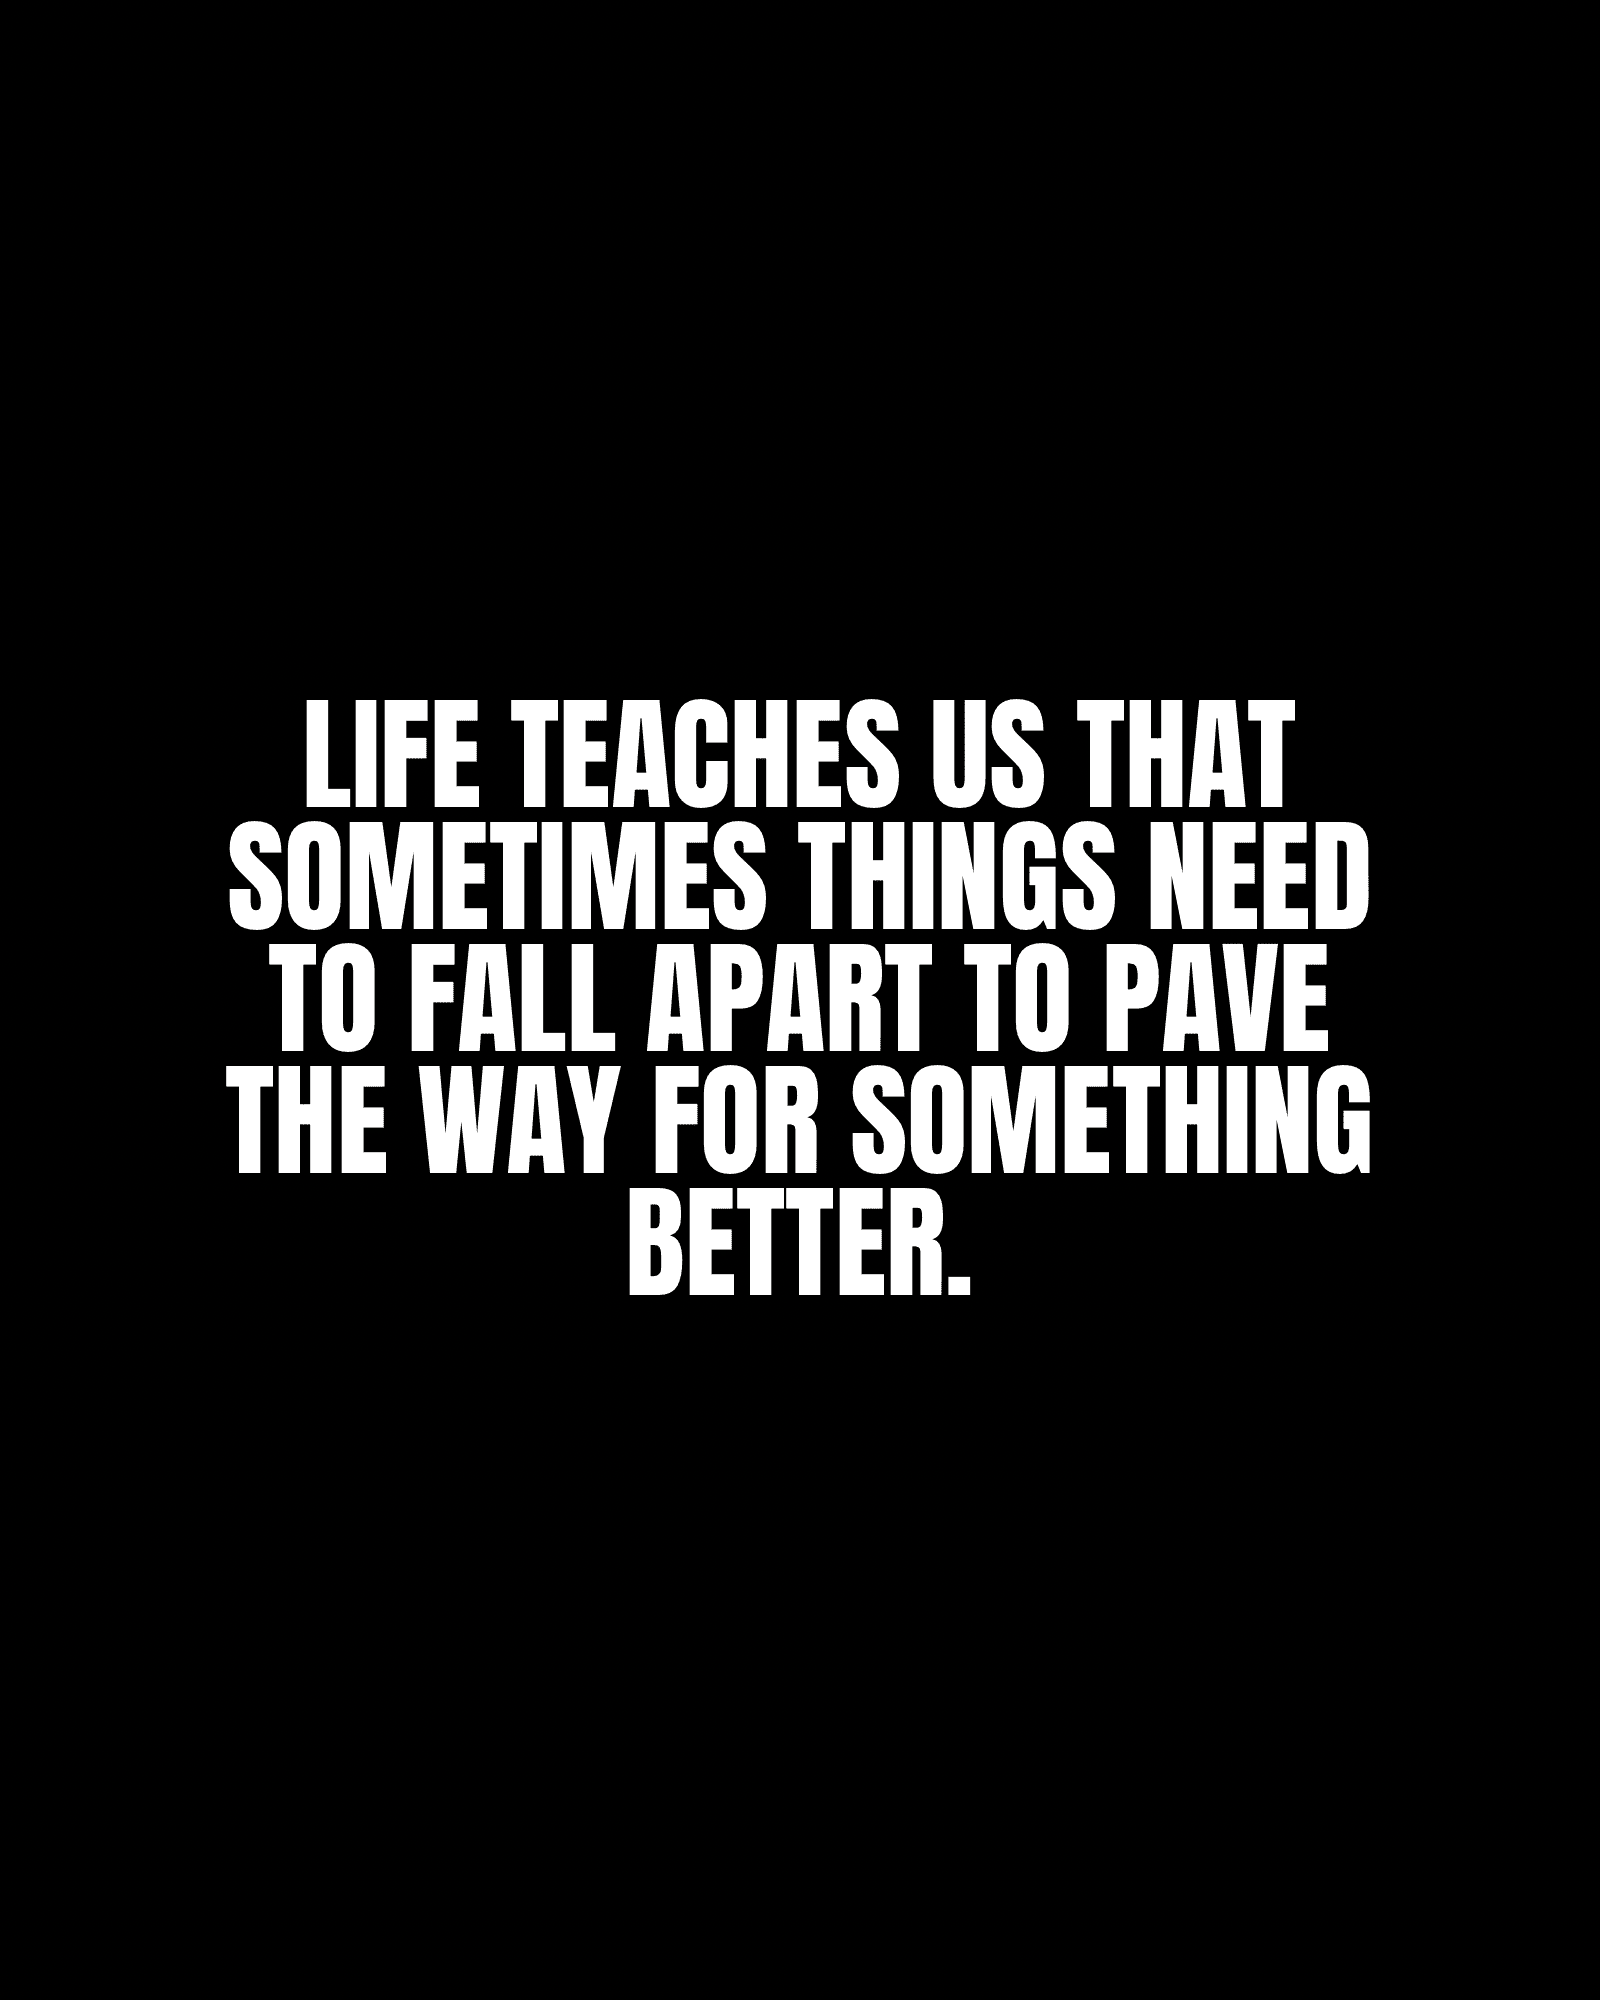 Life teaches us that sometimes things need to fall apart to pave the way for something better.